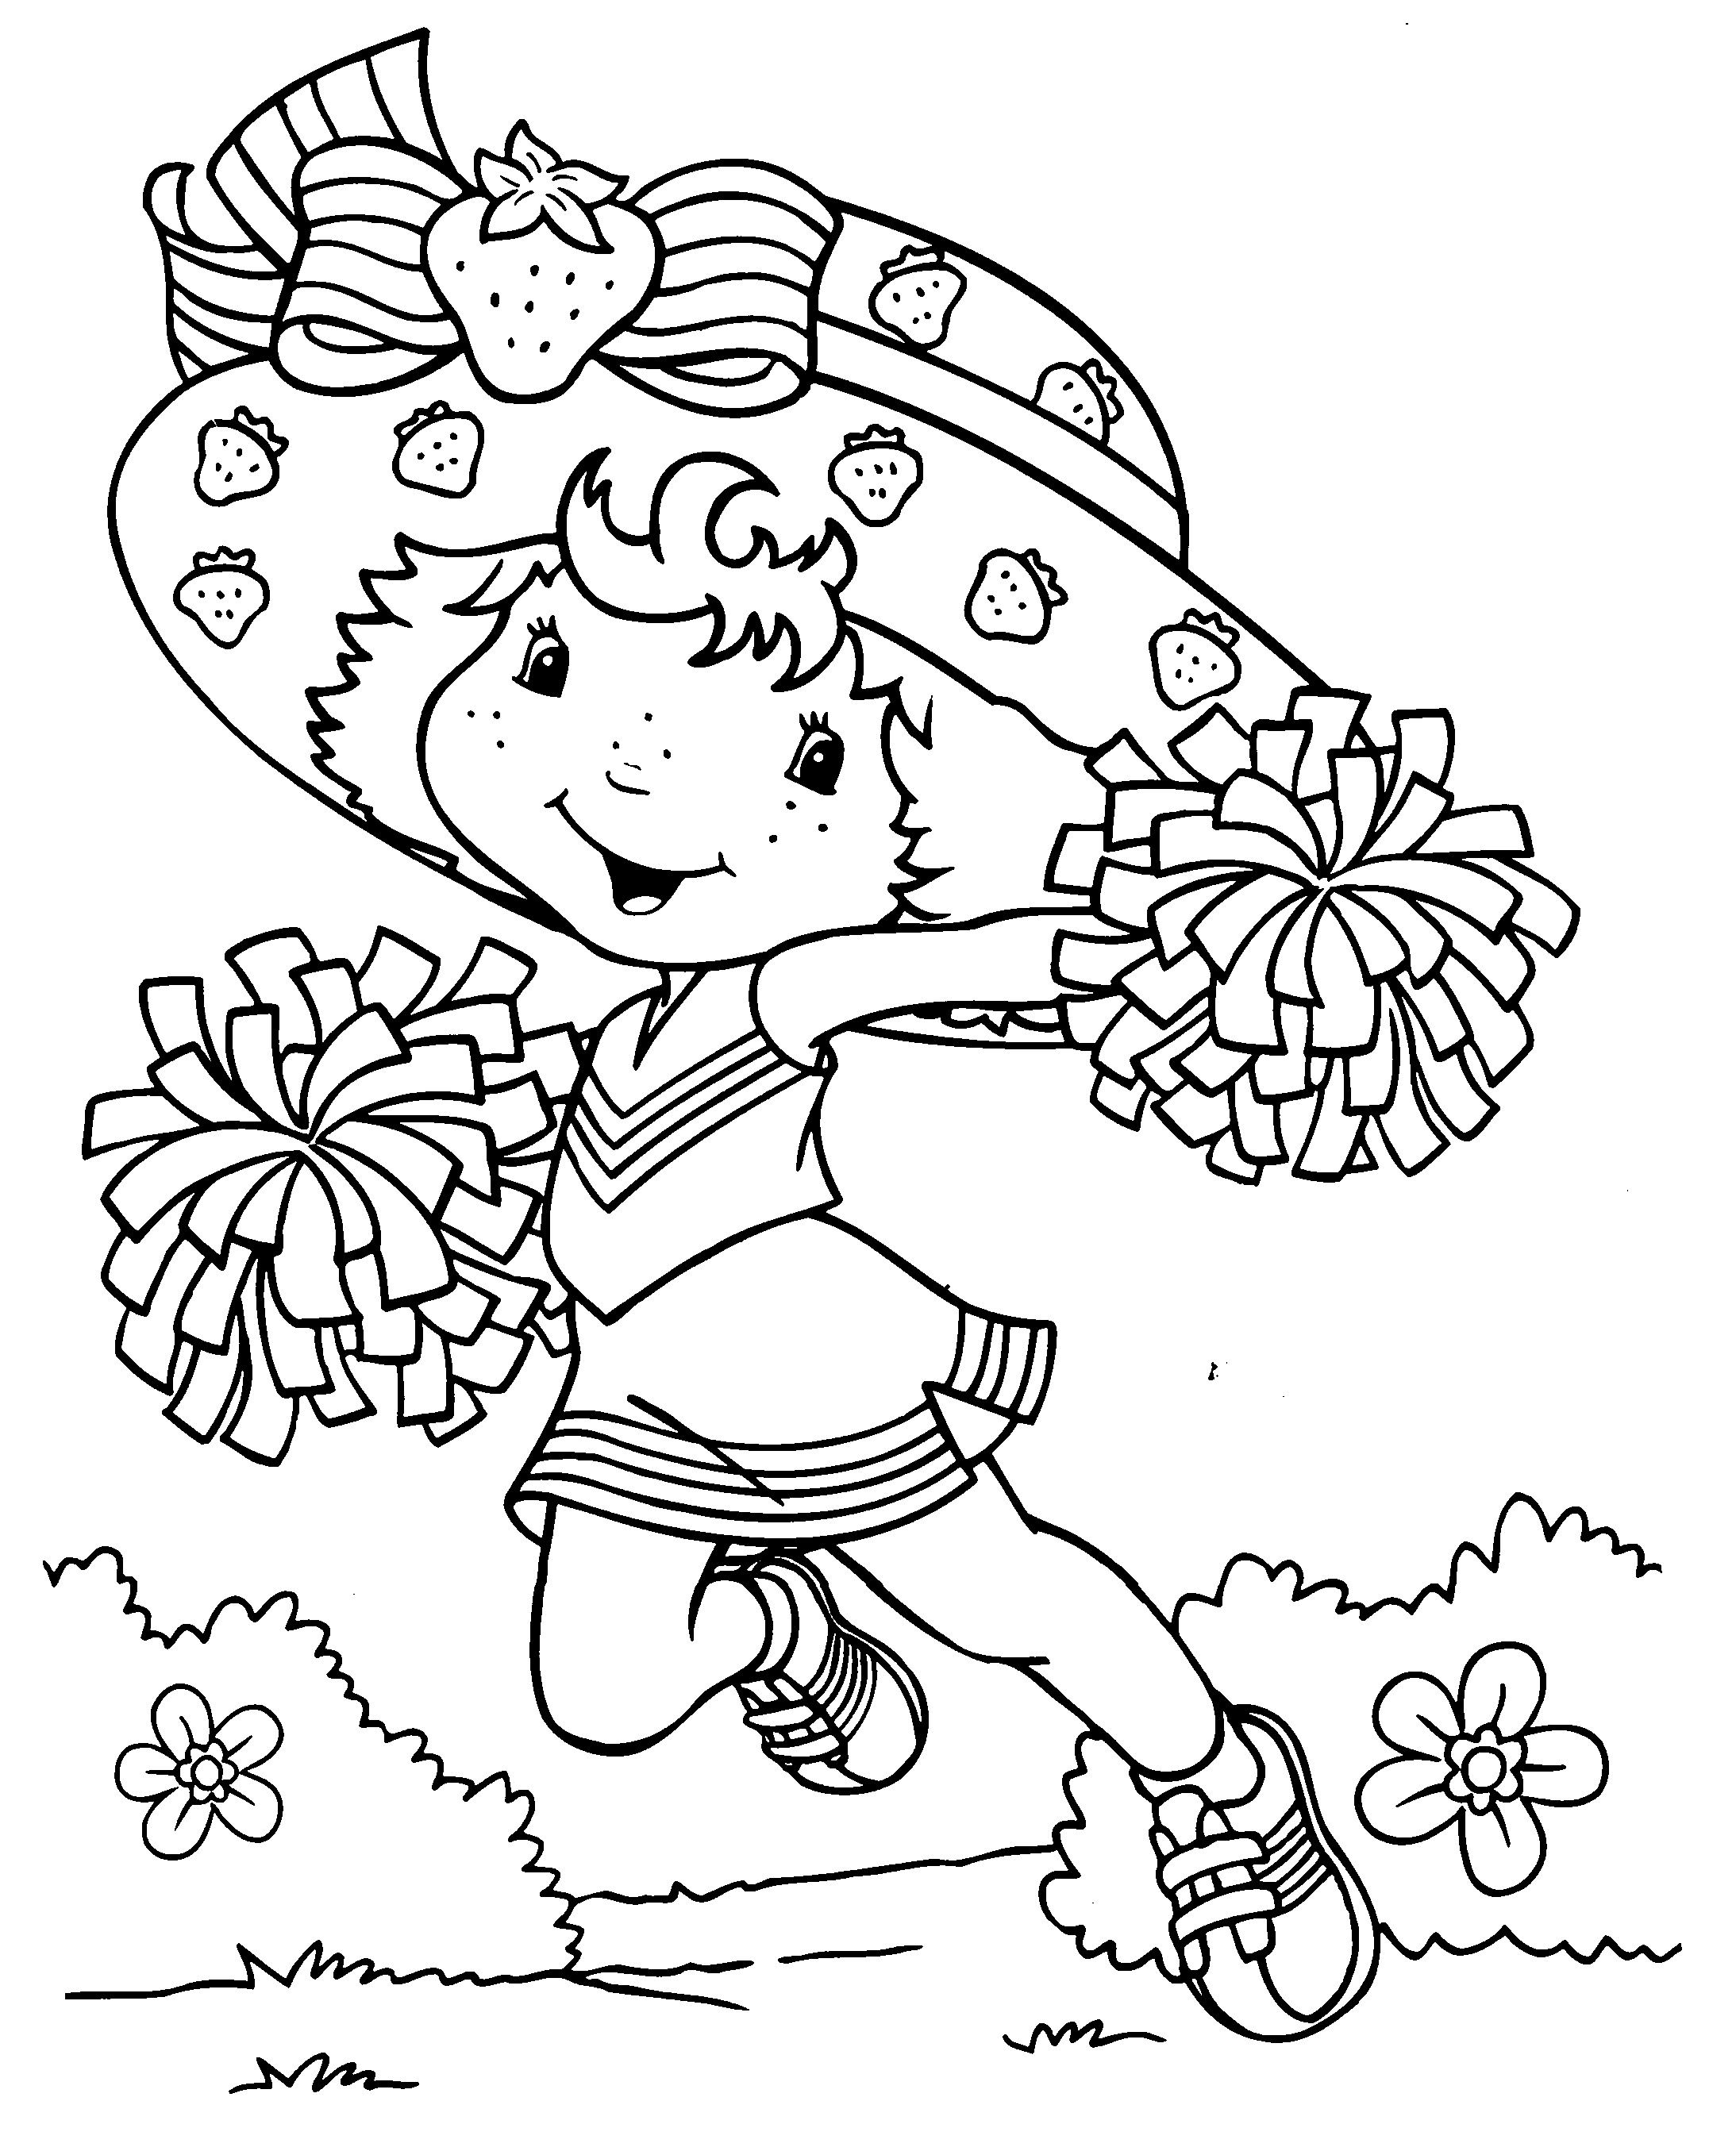 Coloring Pages For Children Strawberry Shortcake 83983 